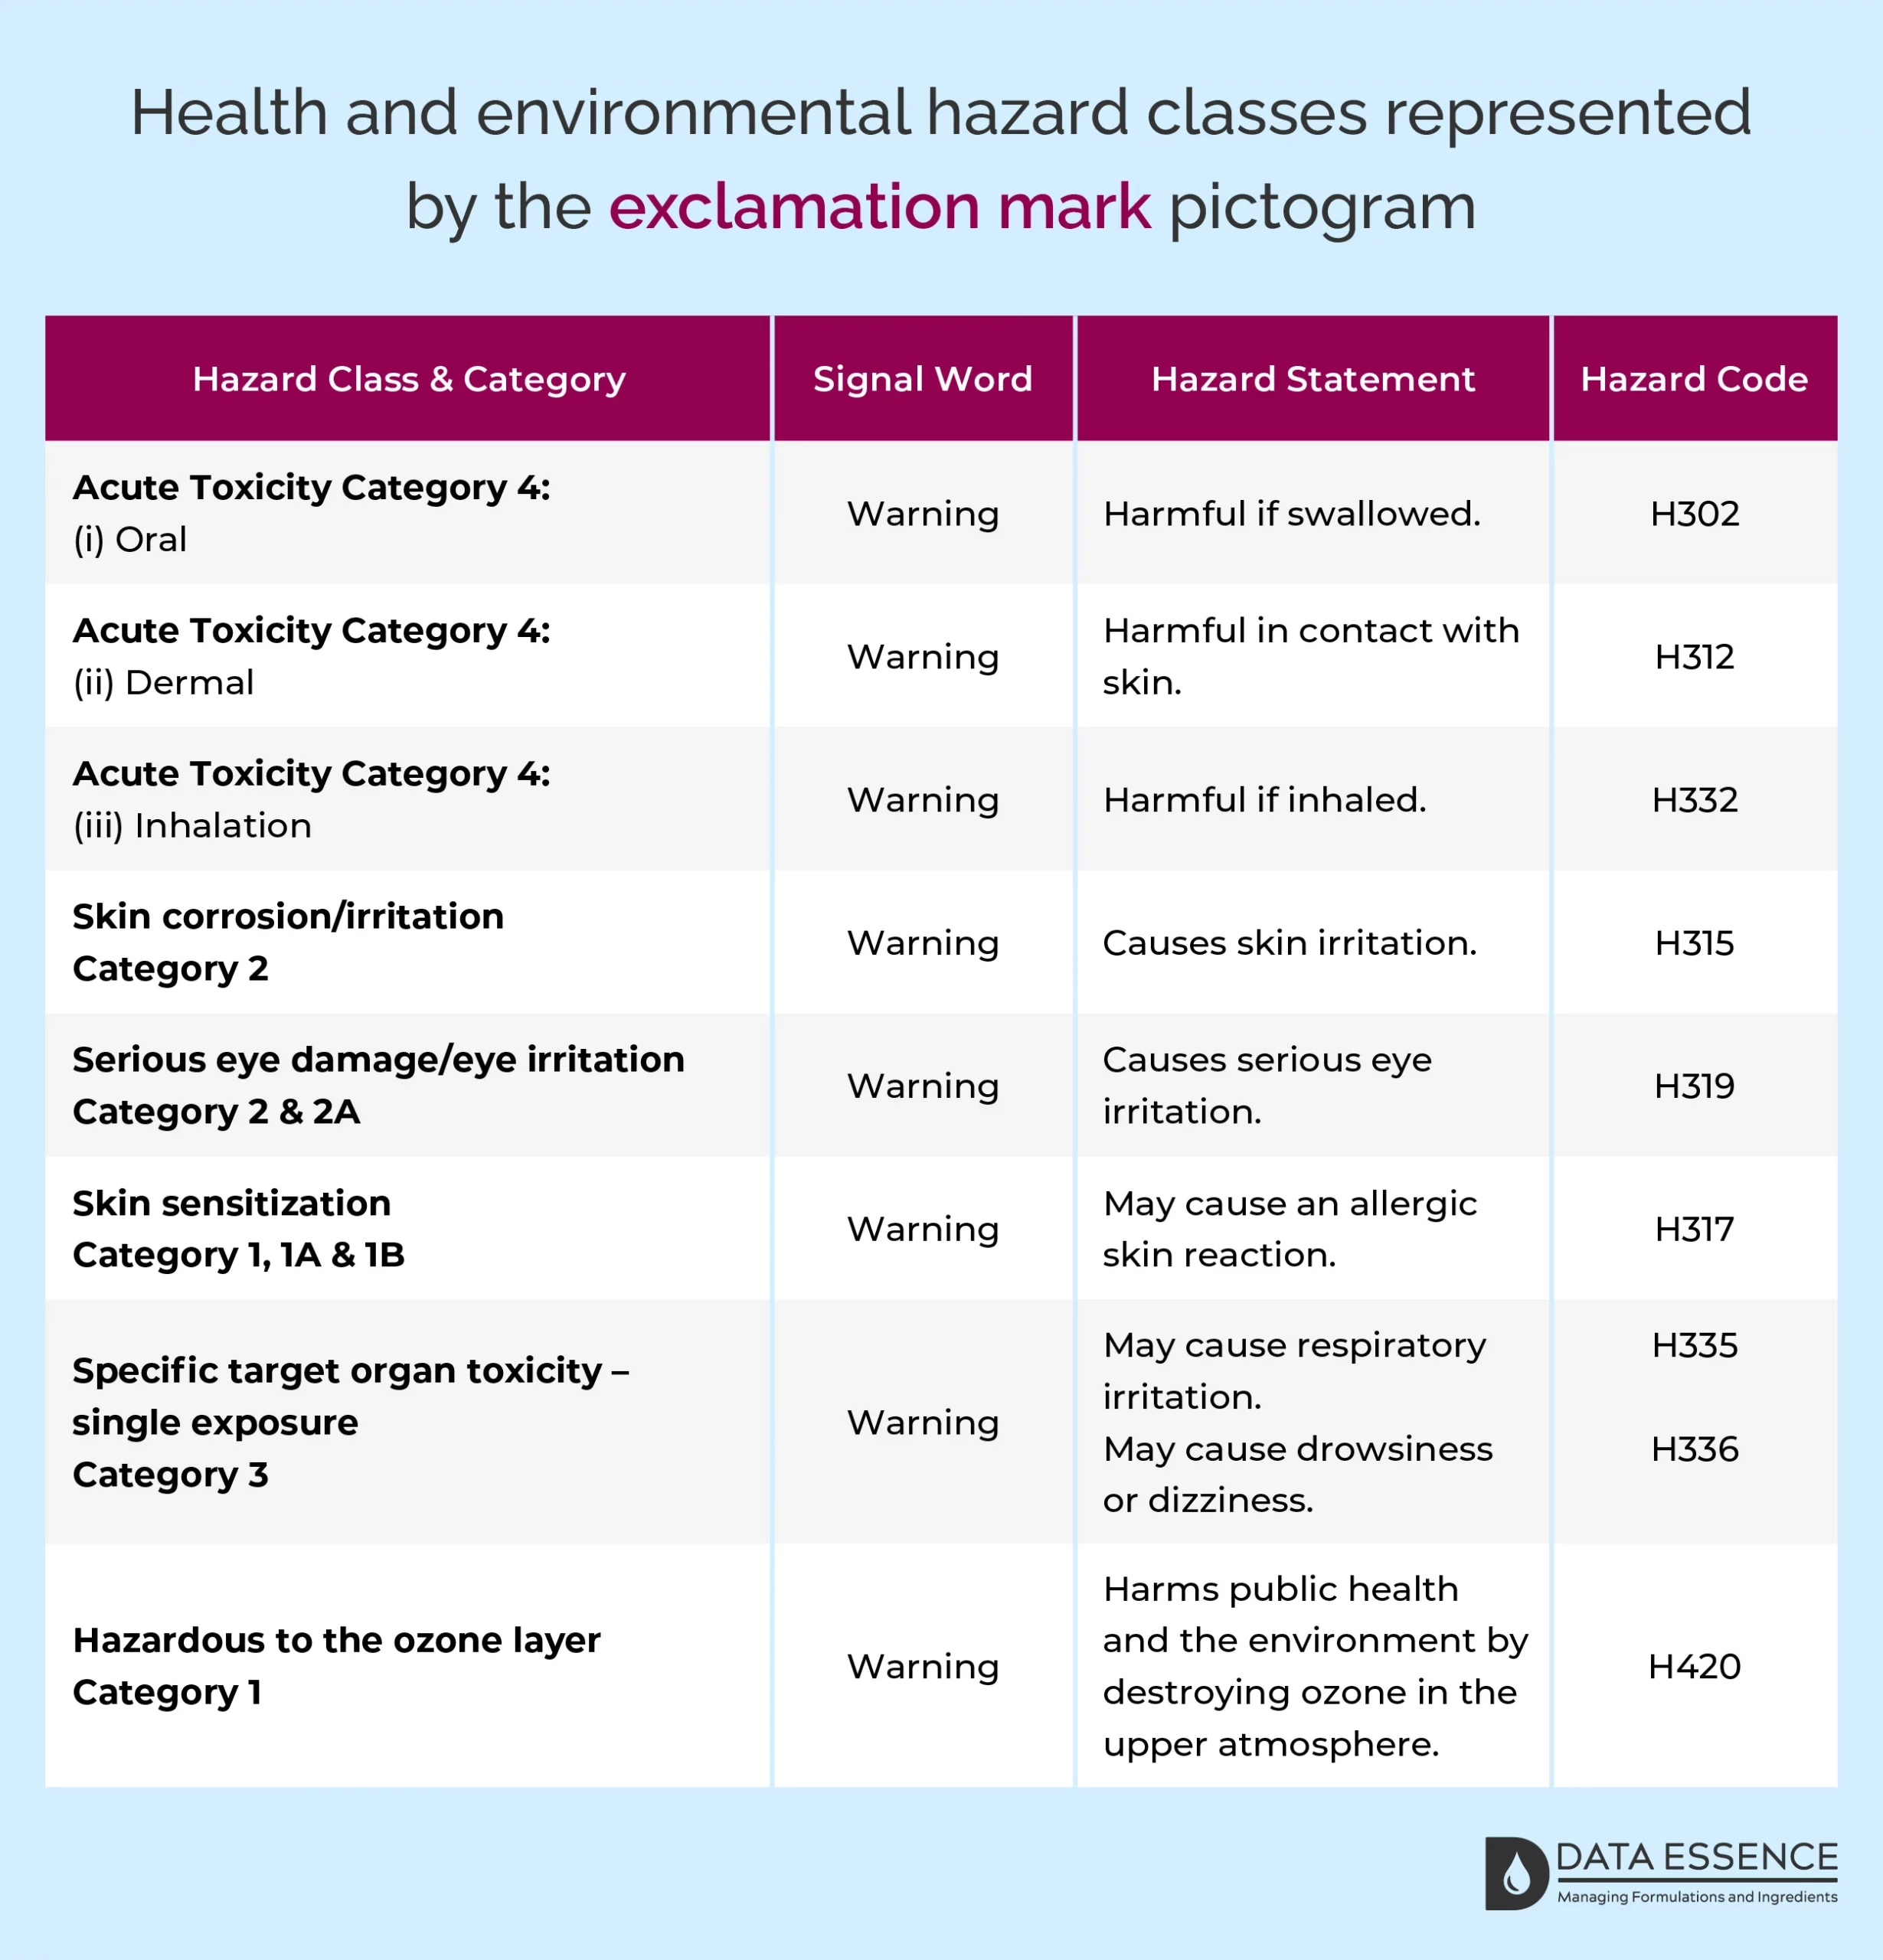 Health and environmental hazard classes represented by the exclamation mark pictogram